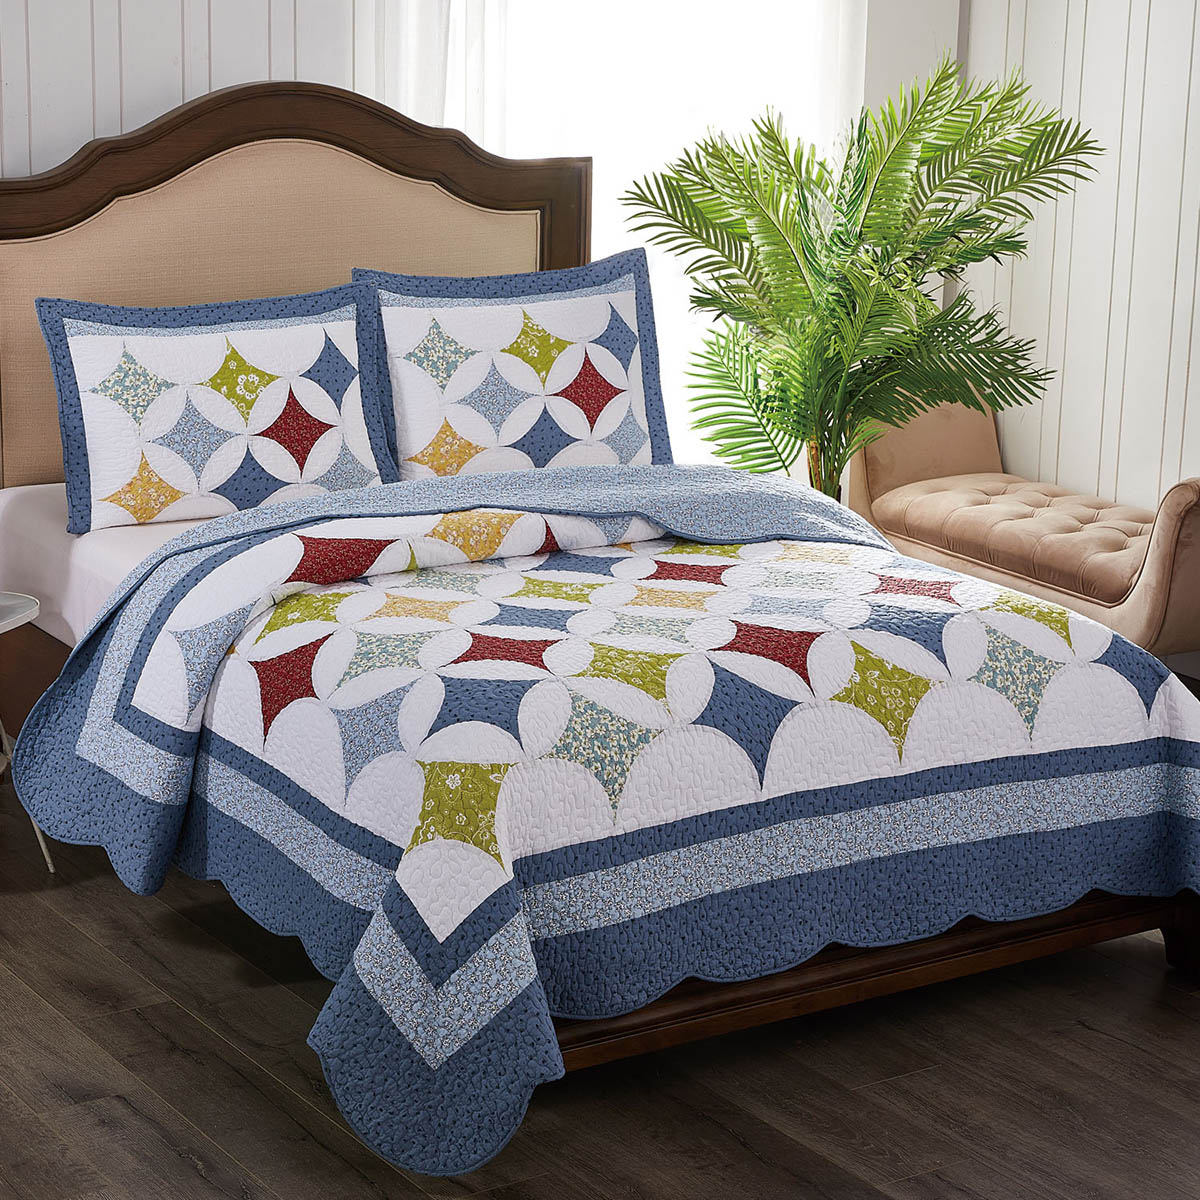 comforters and quilts for sale